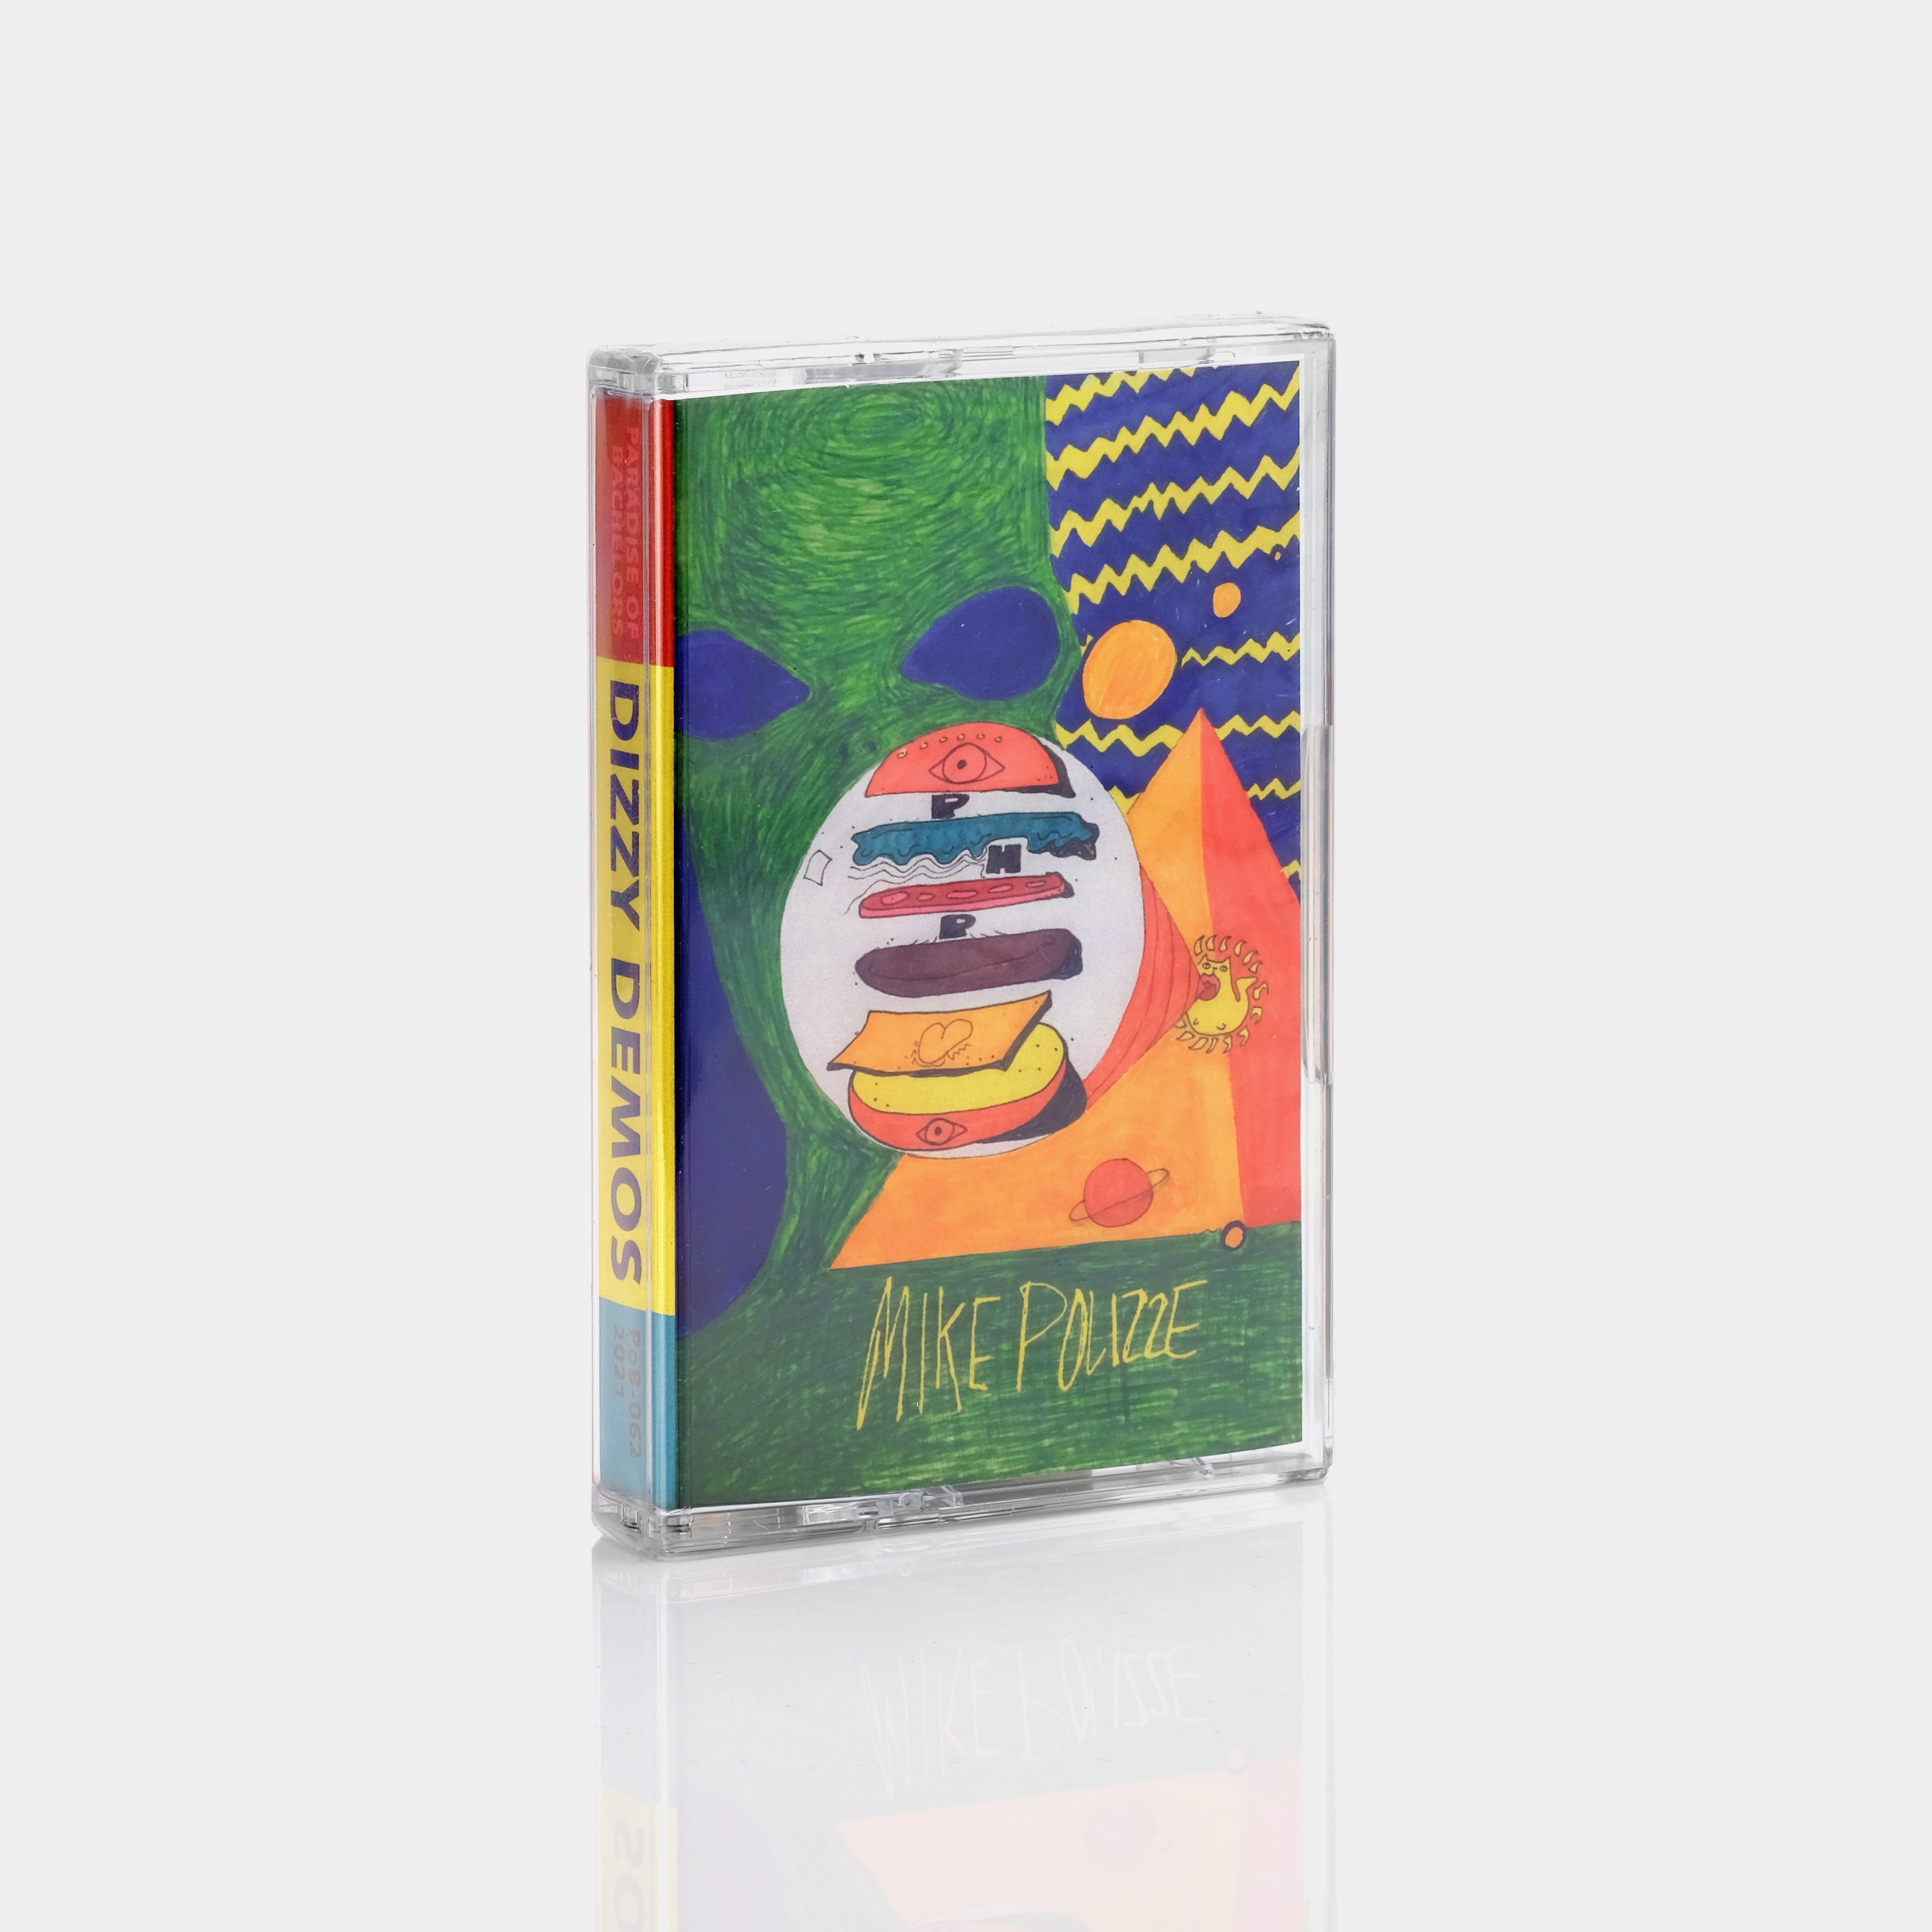 Mike Polizze - Dizzy Demos: 2 Tickets To Cheeseburger In Paradise Cassette Tape